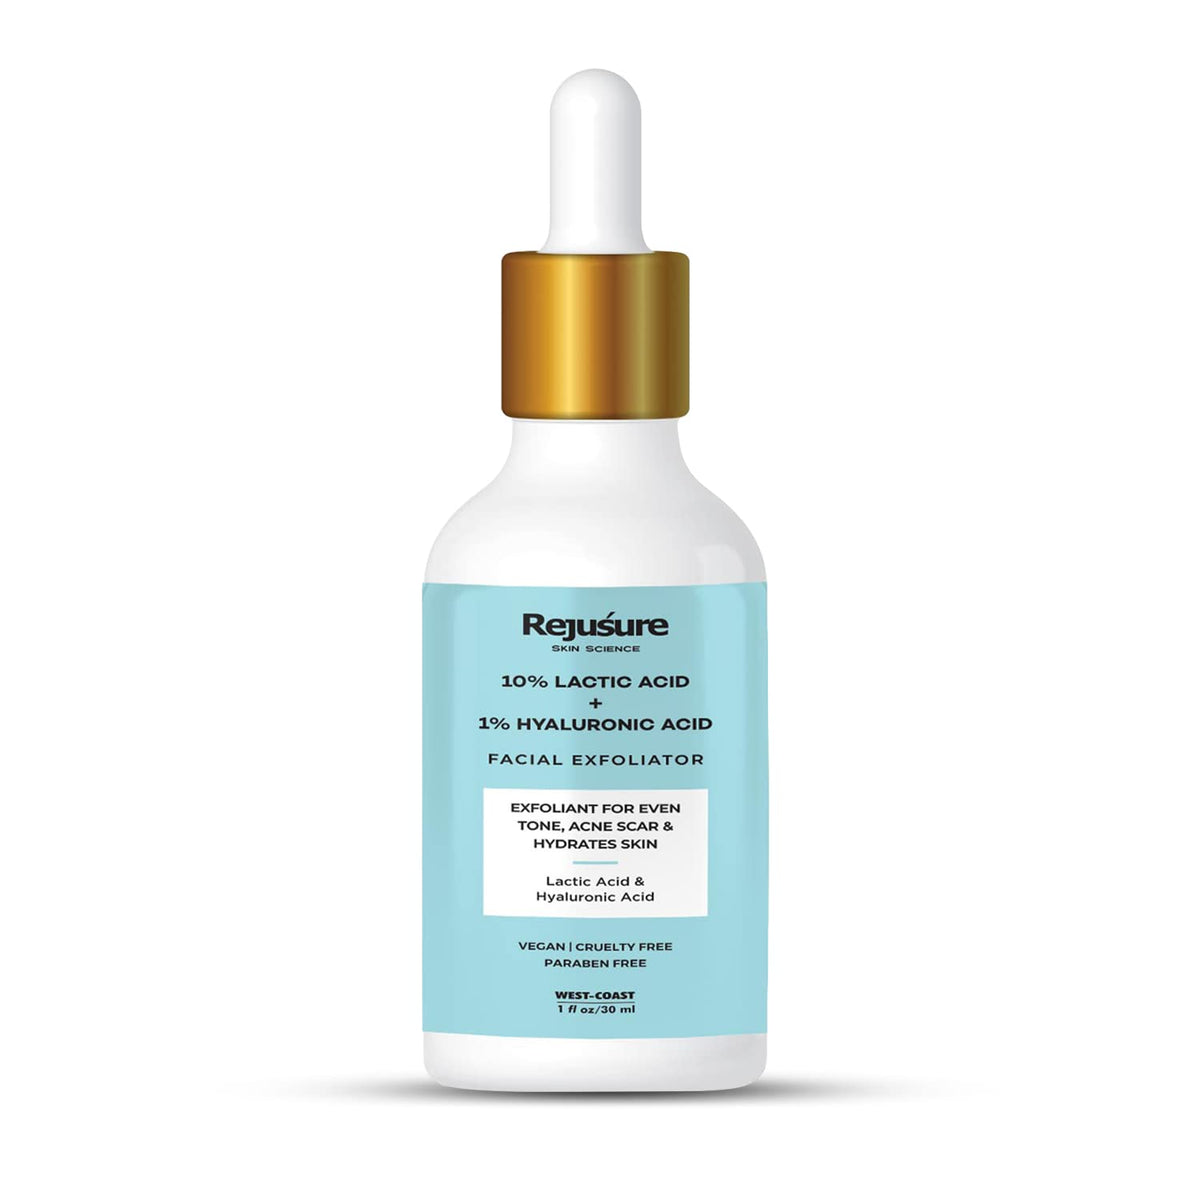 Rejusure Lactic Acid 10% + Hyaluronic Acid 1% Facial Exfoliator - Hydrating and Rejuvenating Serum | Even Tone | Acne Care | Skin Hydration - Ideal for Sensitive, Dry & Oily Skin | 30ml